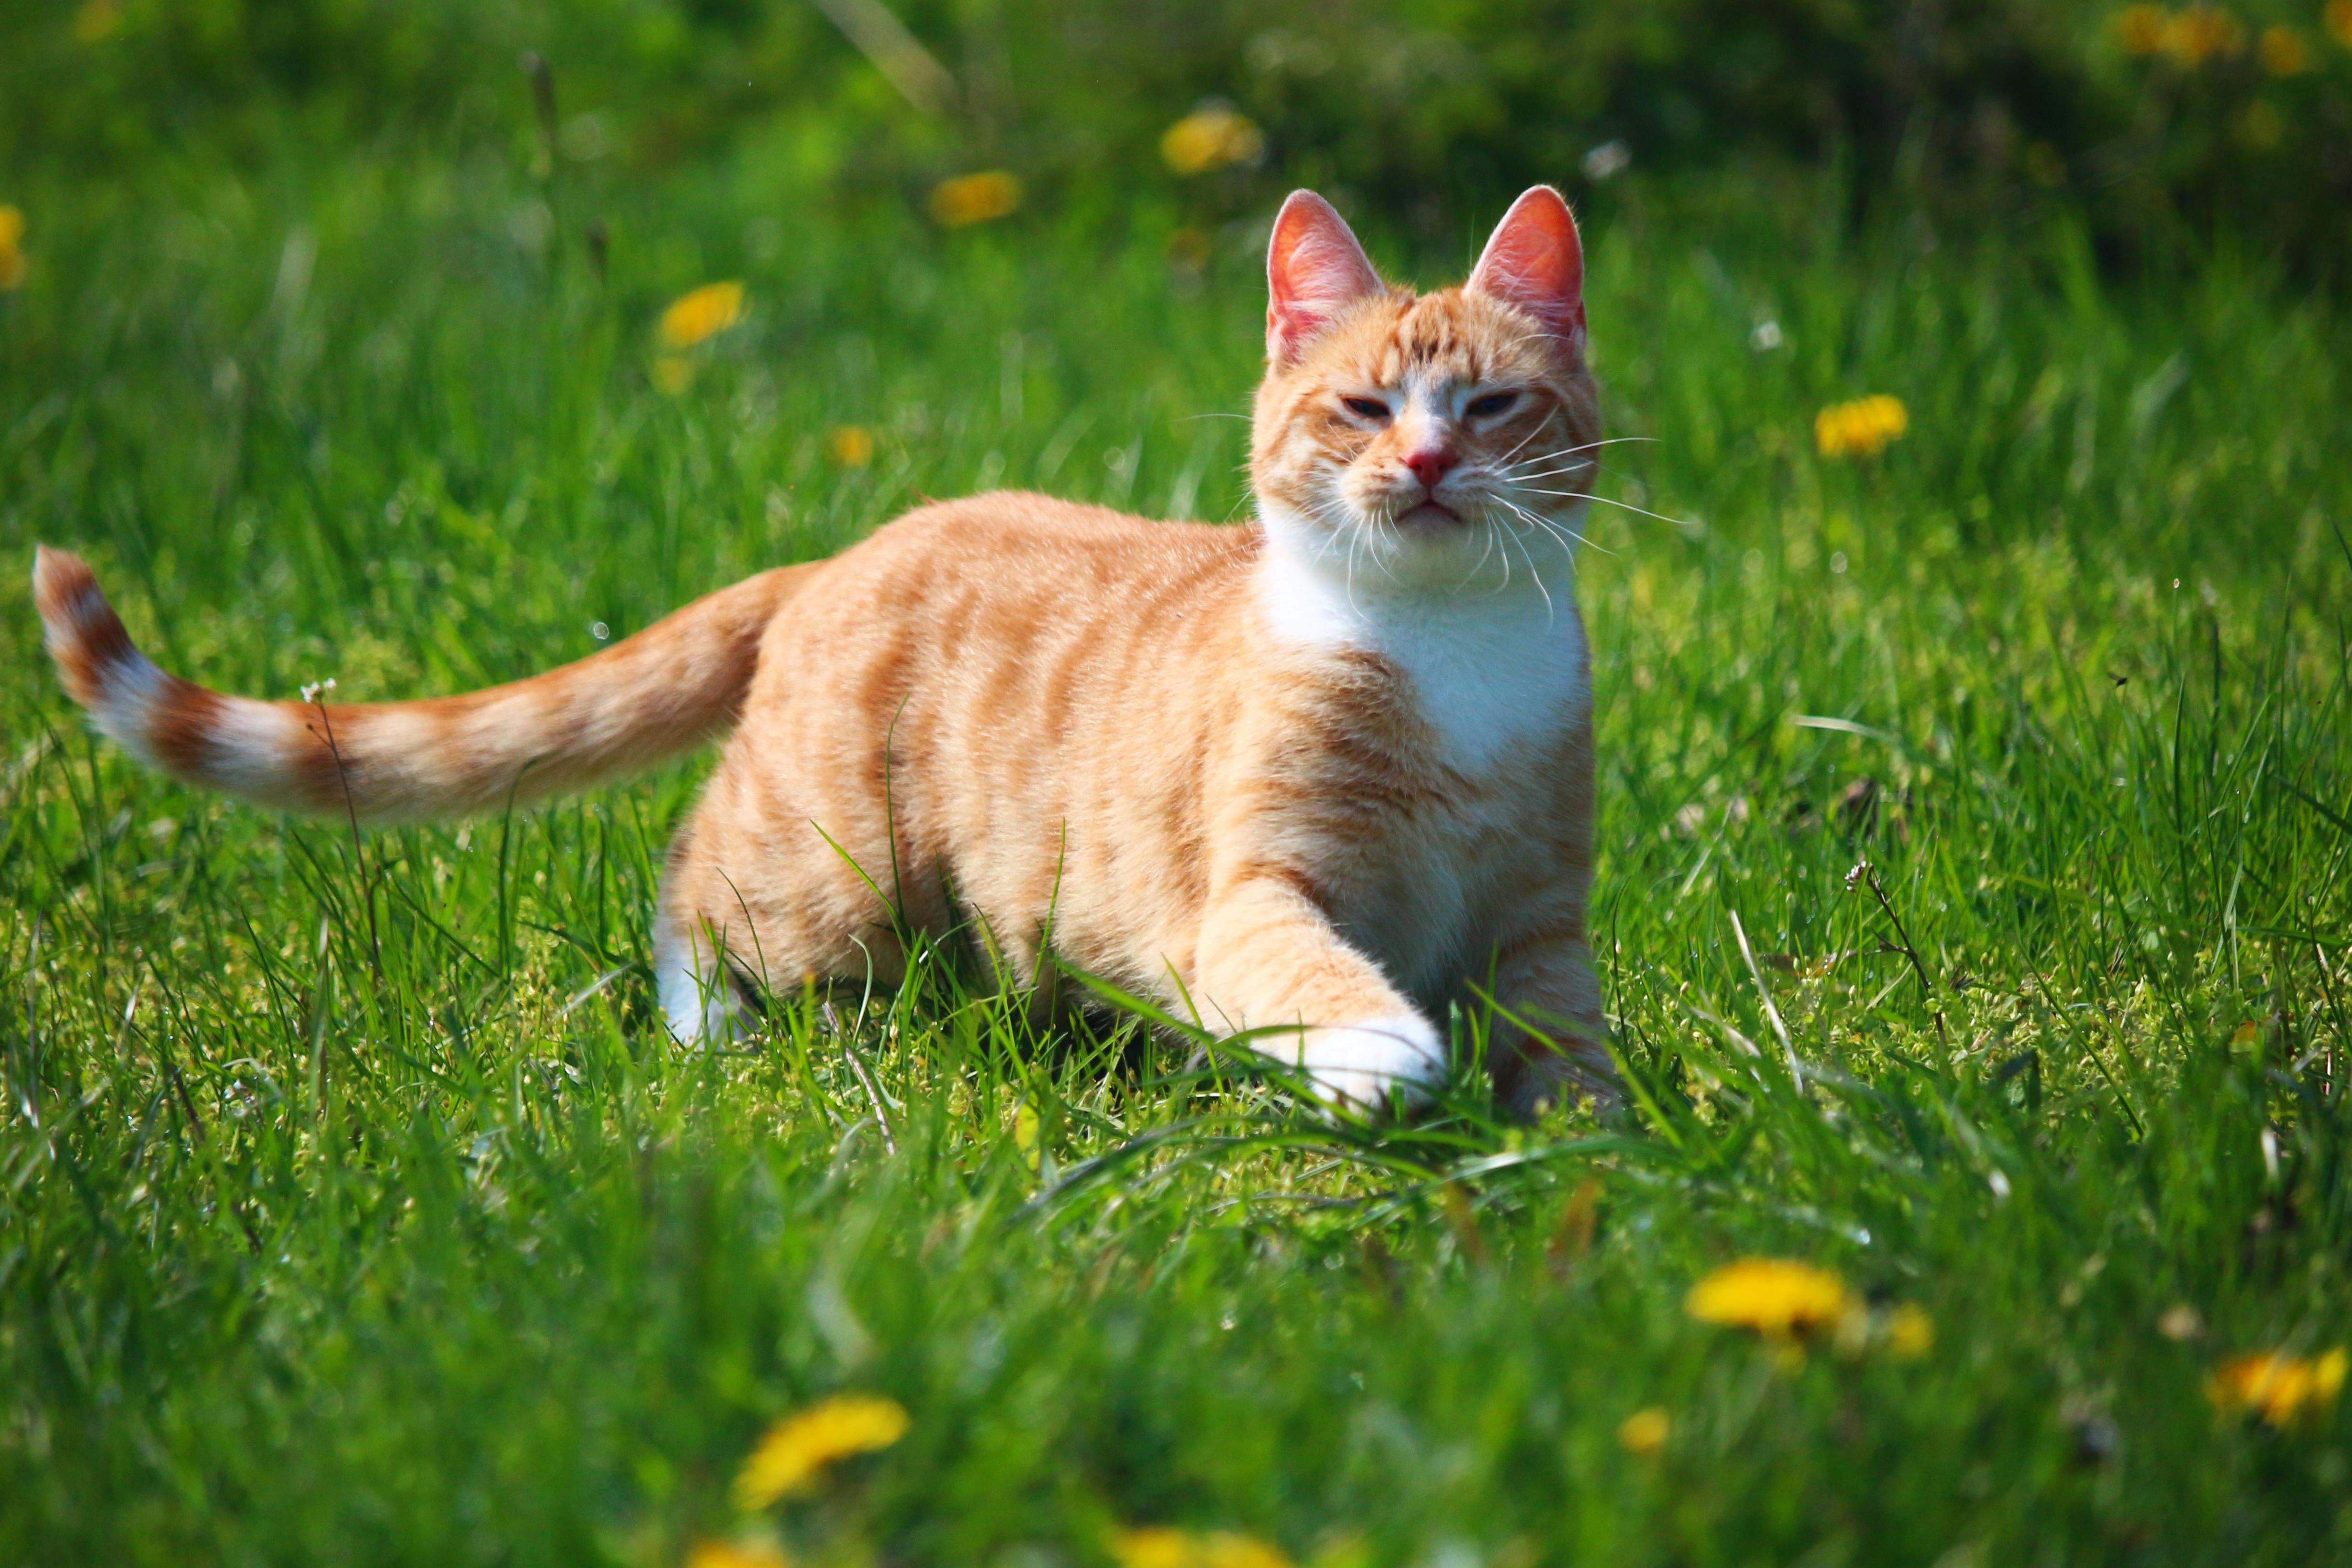 Free picture: grass, cute, nature, animal, field, young, yellow cat ...